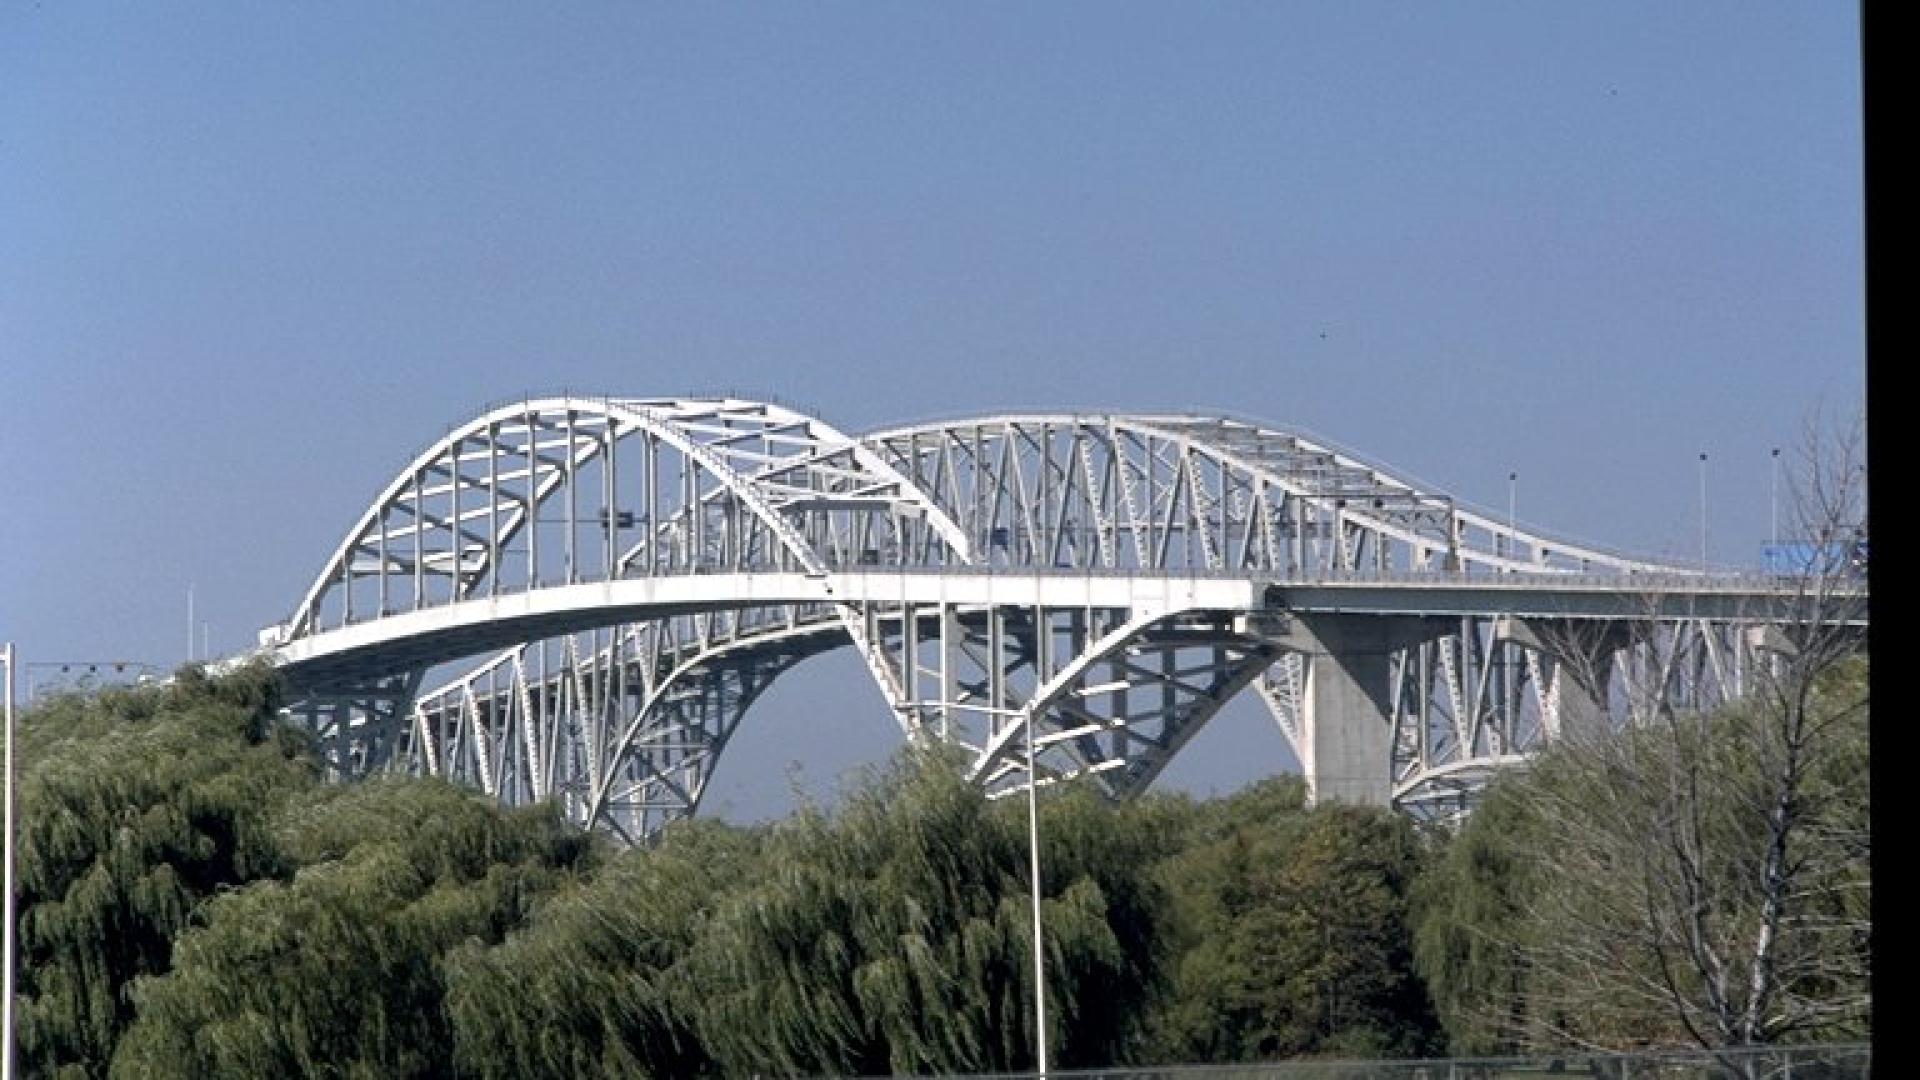 Landscape of bridge with blue sky in the background.